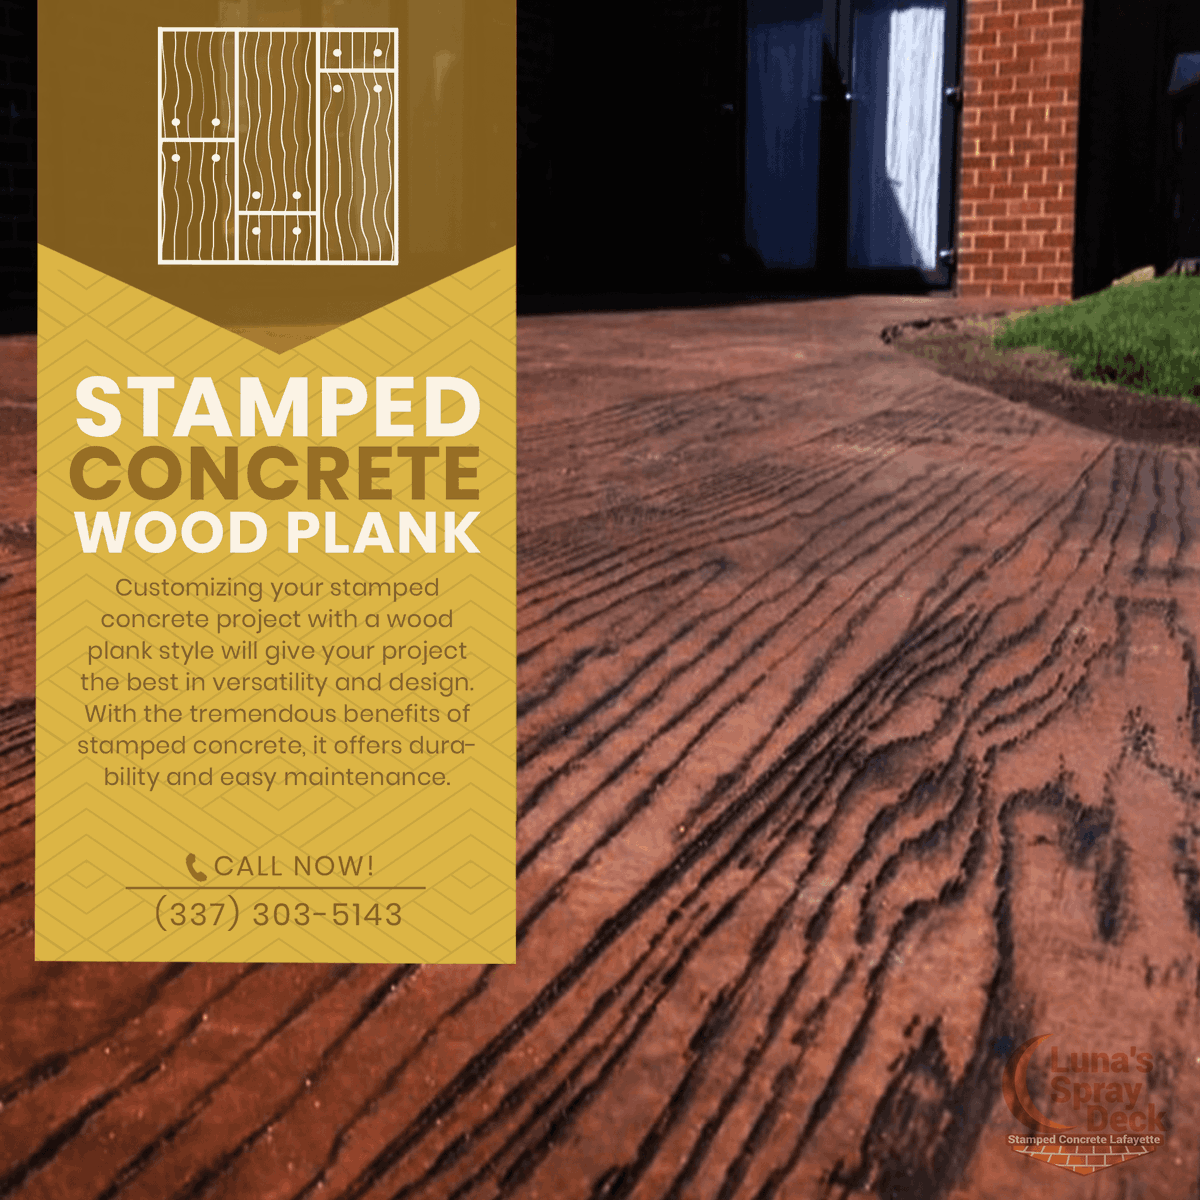 Our stamped concrete with wood plank design offers an elegant and durable alternative.

Check out all the services that we got for you! 🌙🌙
Call now for a free quote 📲 (337) 303-5143

View more at StampedConcreteLafayette.com
#StampedConcreteLafayette #outdoordesign